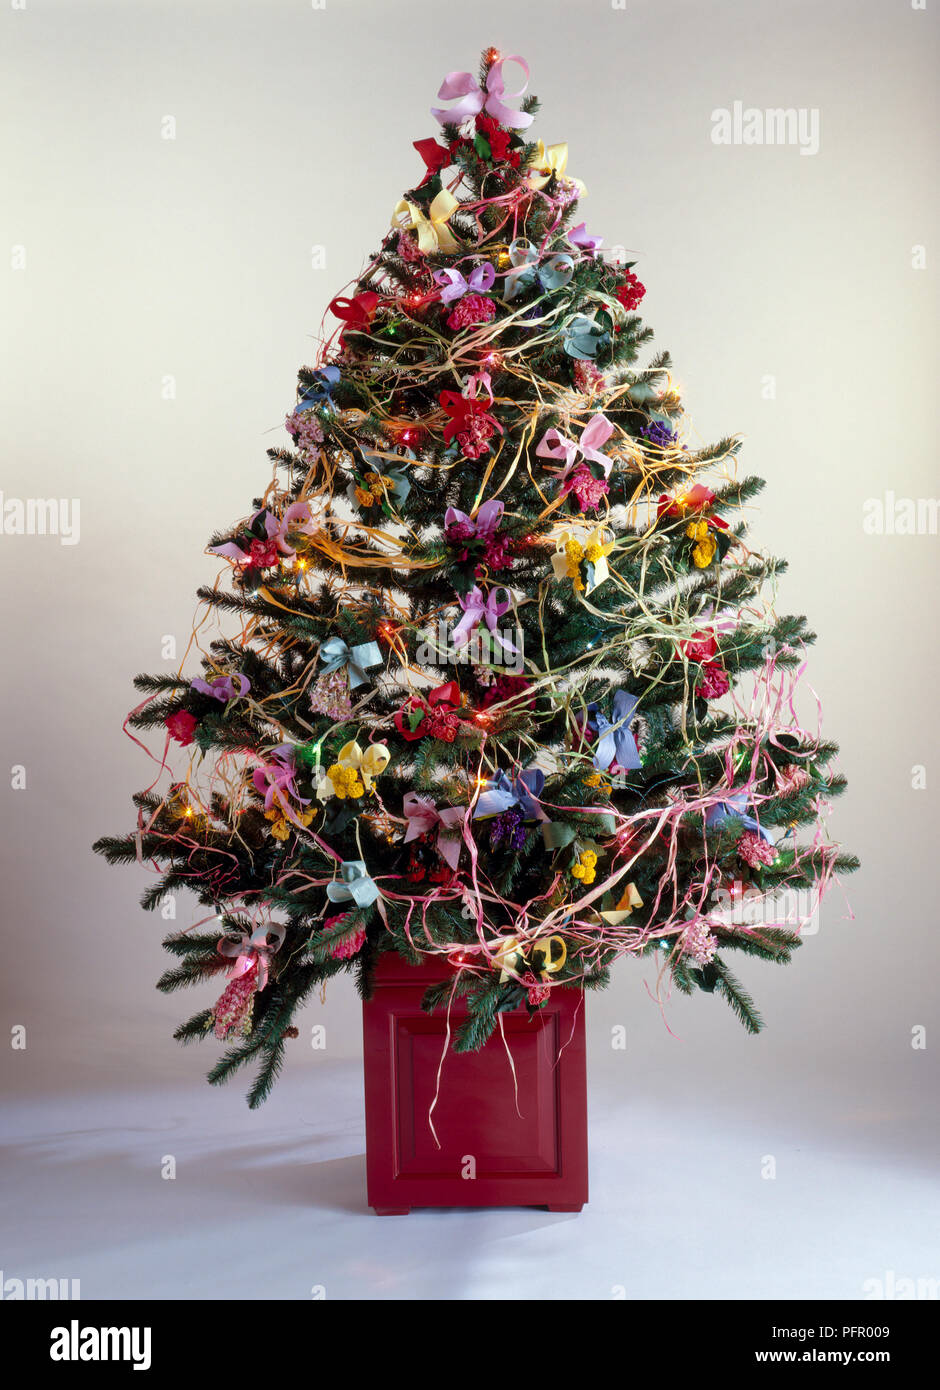 A Christmas tree covered in dried flower decorations Stock Photo